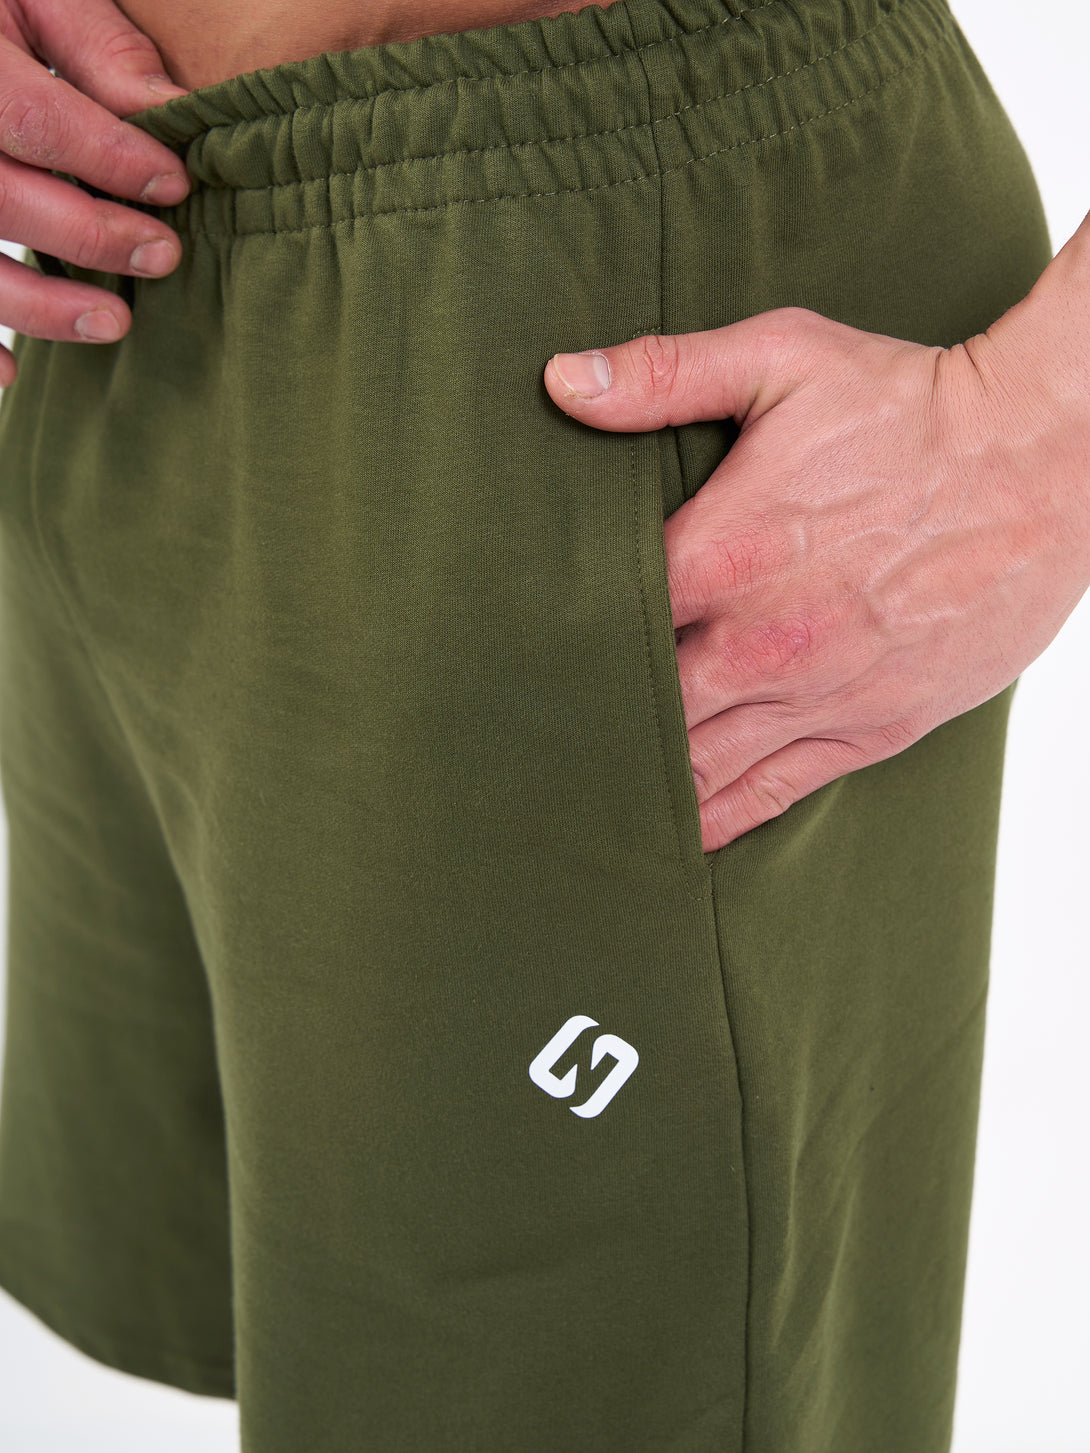 A Man Wearing Zen Khaki Color Men's Easy-Fit Shorts for All-Day Wear